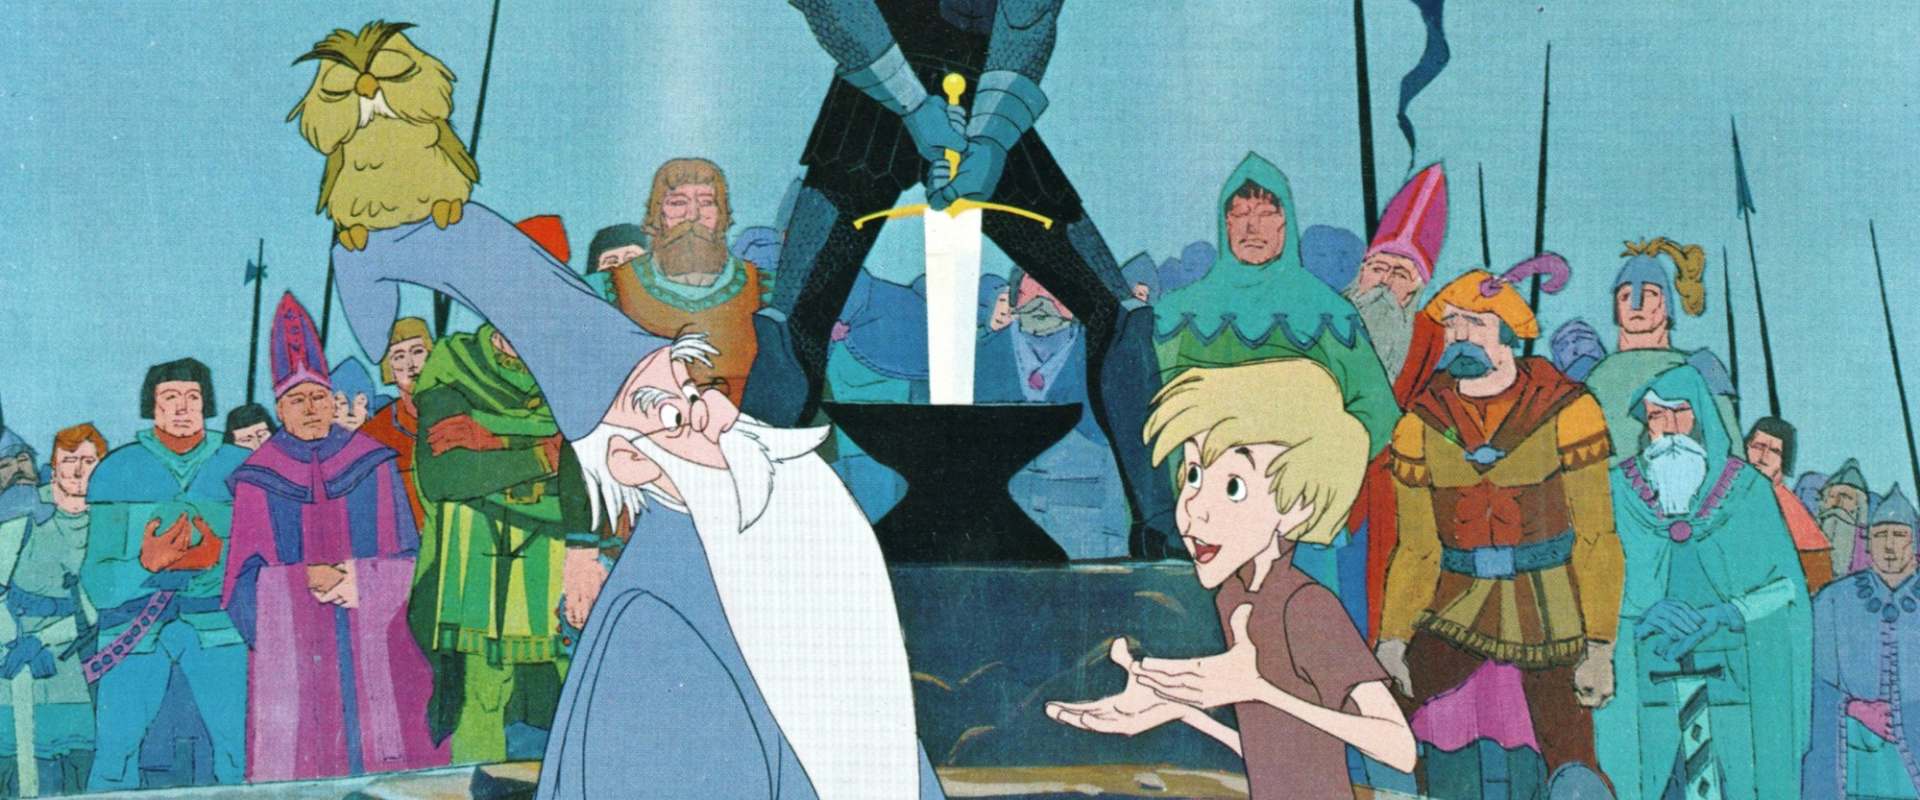 The Sword in the Stone background 1